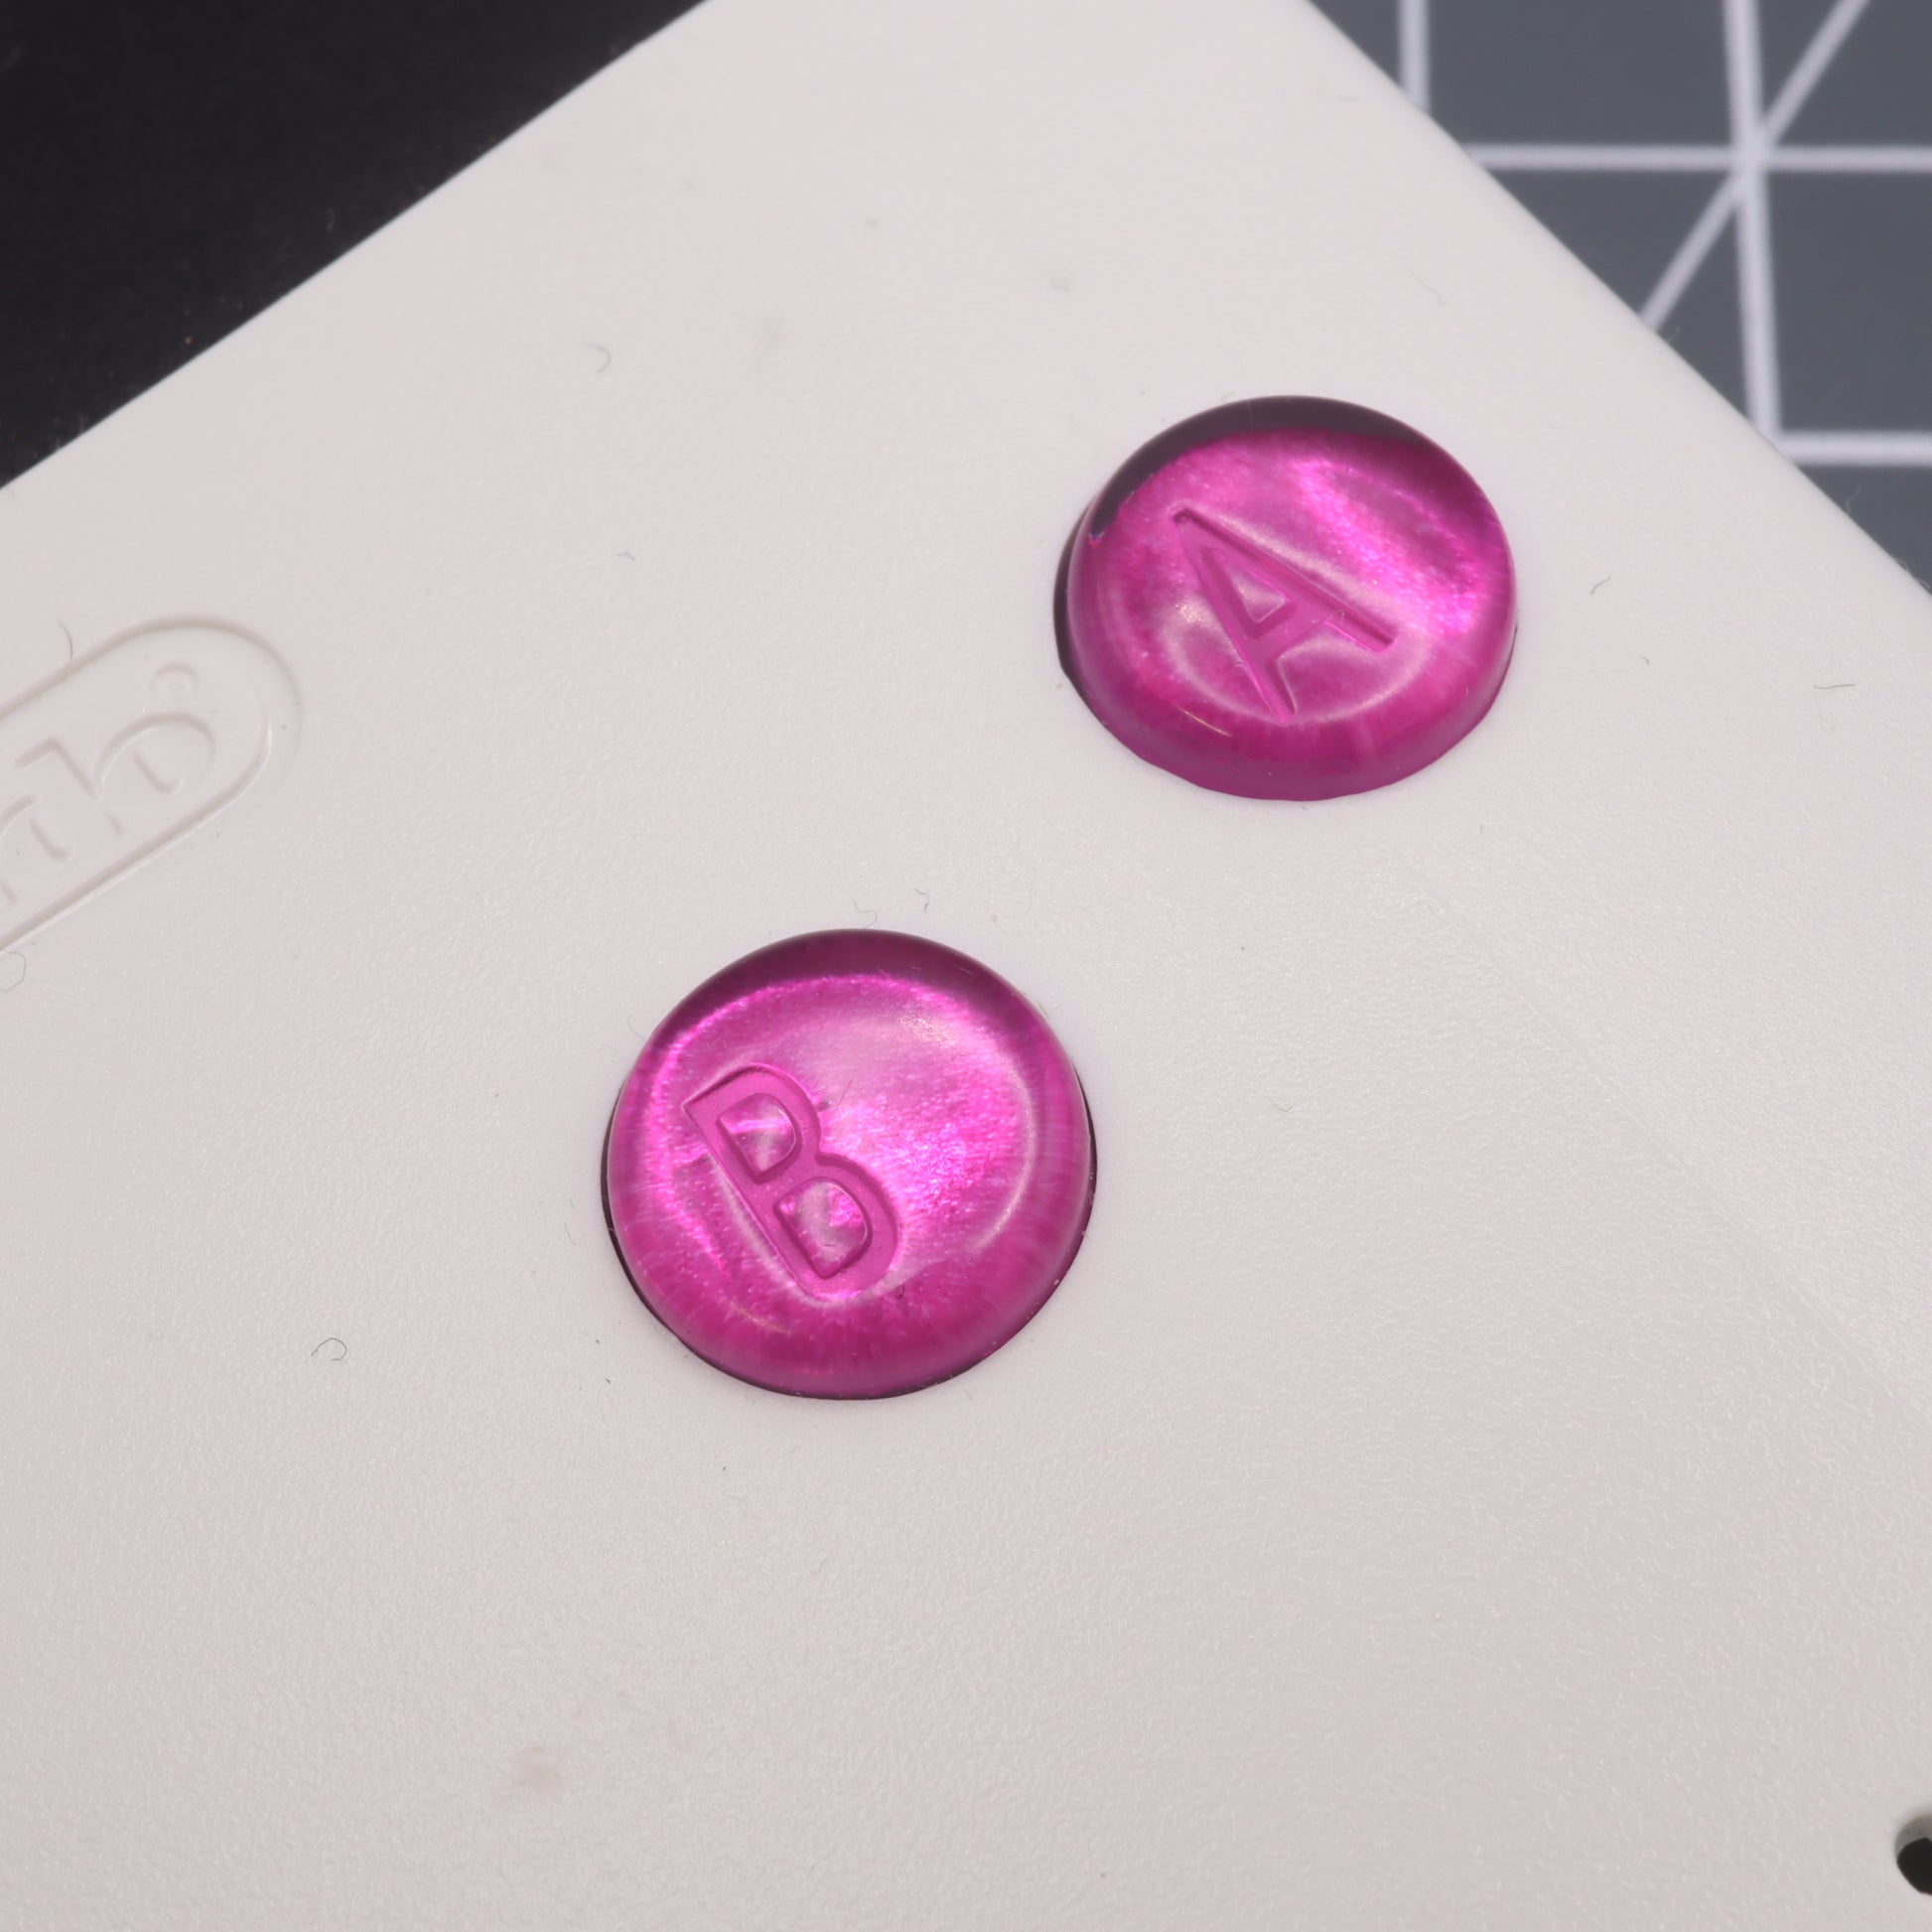 Game Boy Color custom resin buttons by lab fifteen co chrome pink colour in white console housing